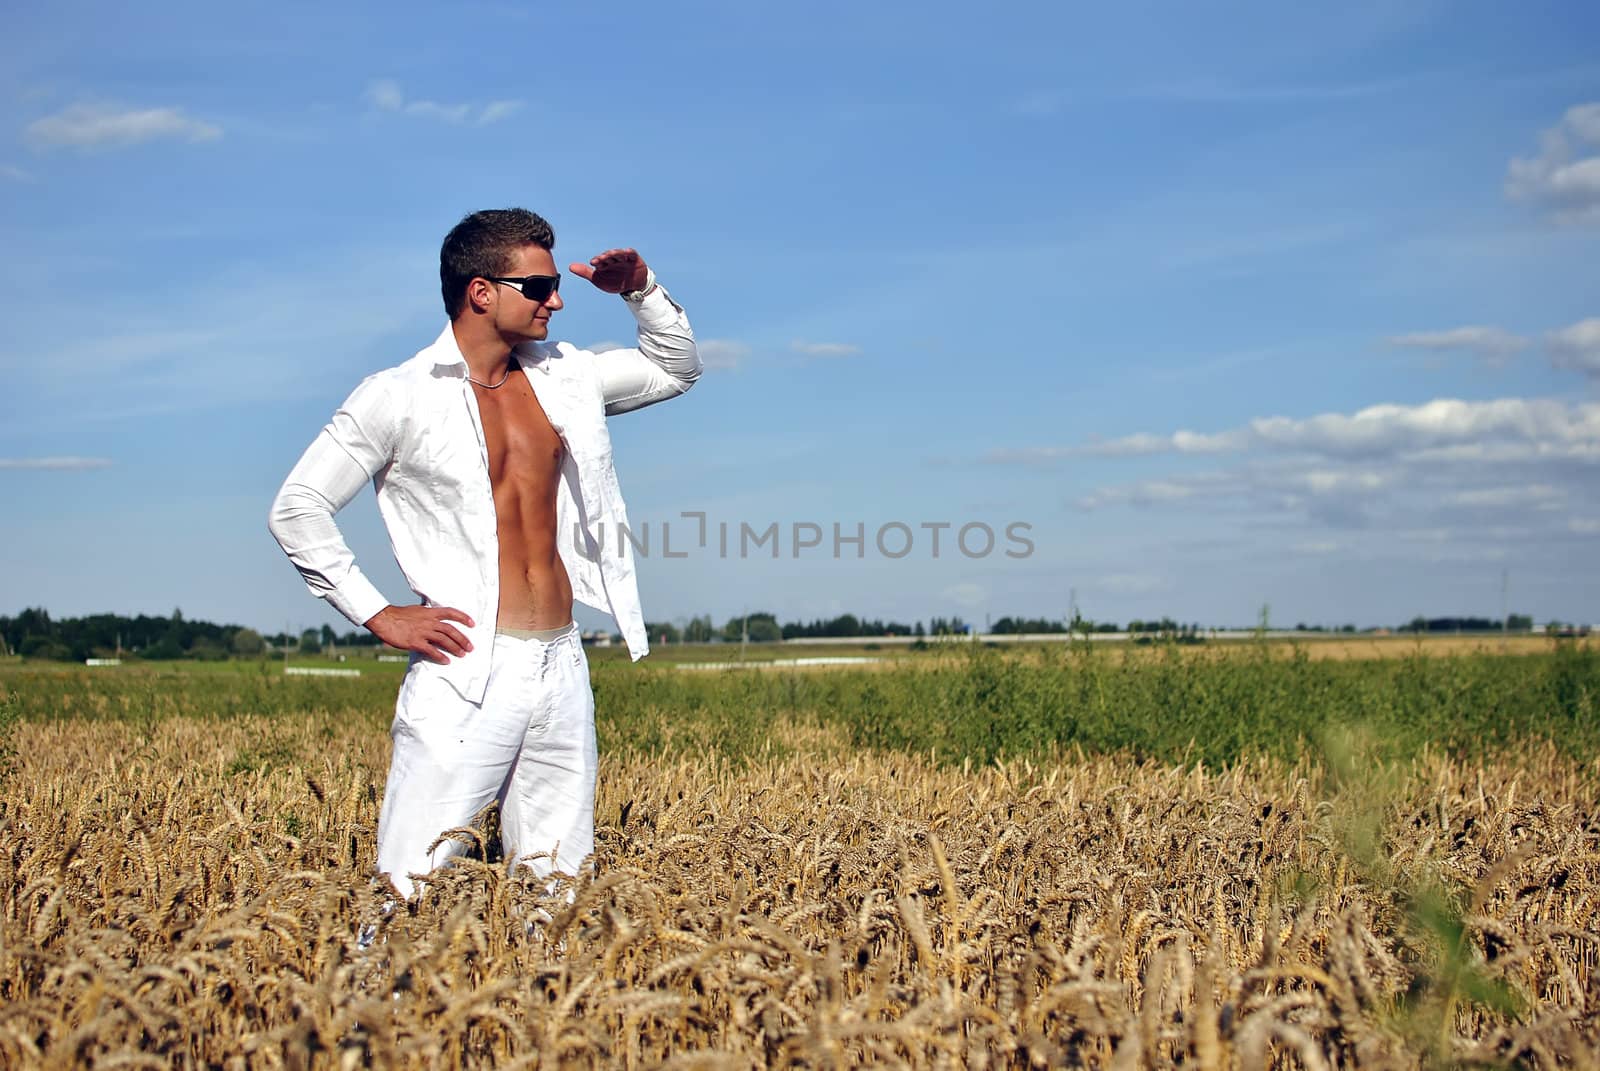 Bodybuilder with sunglasses dressed in white on the field